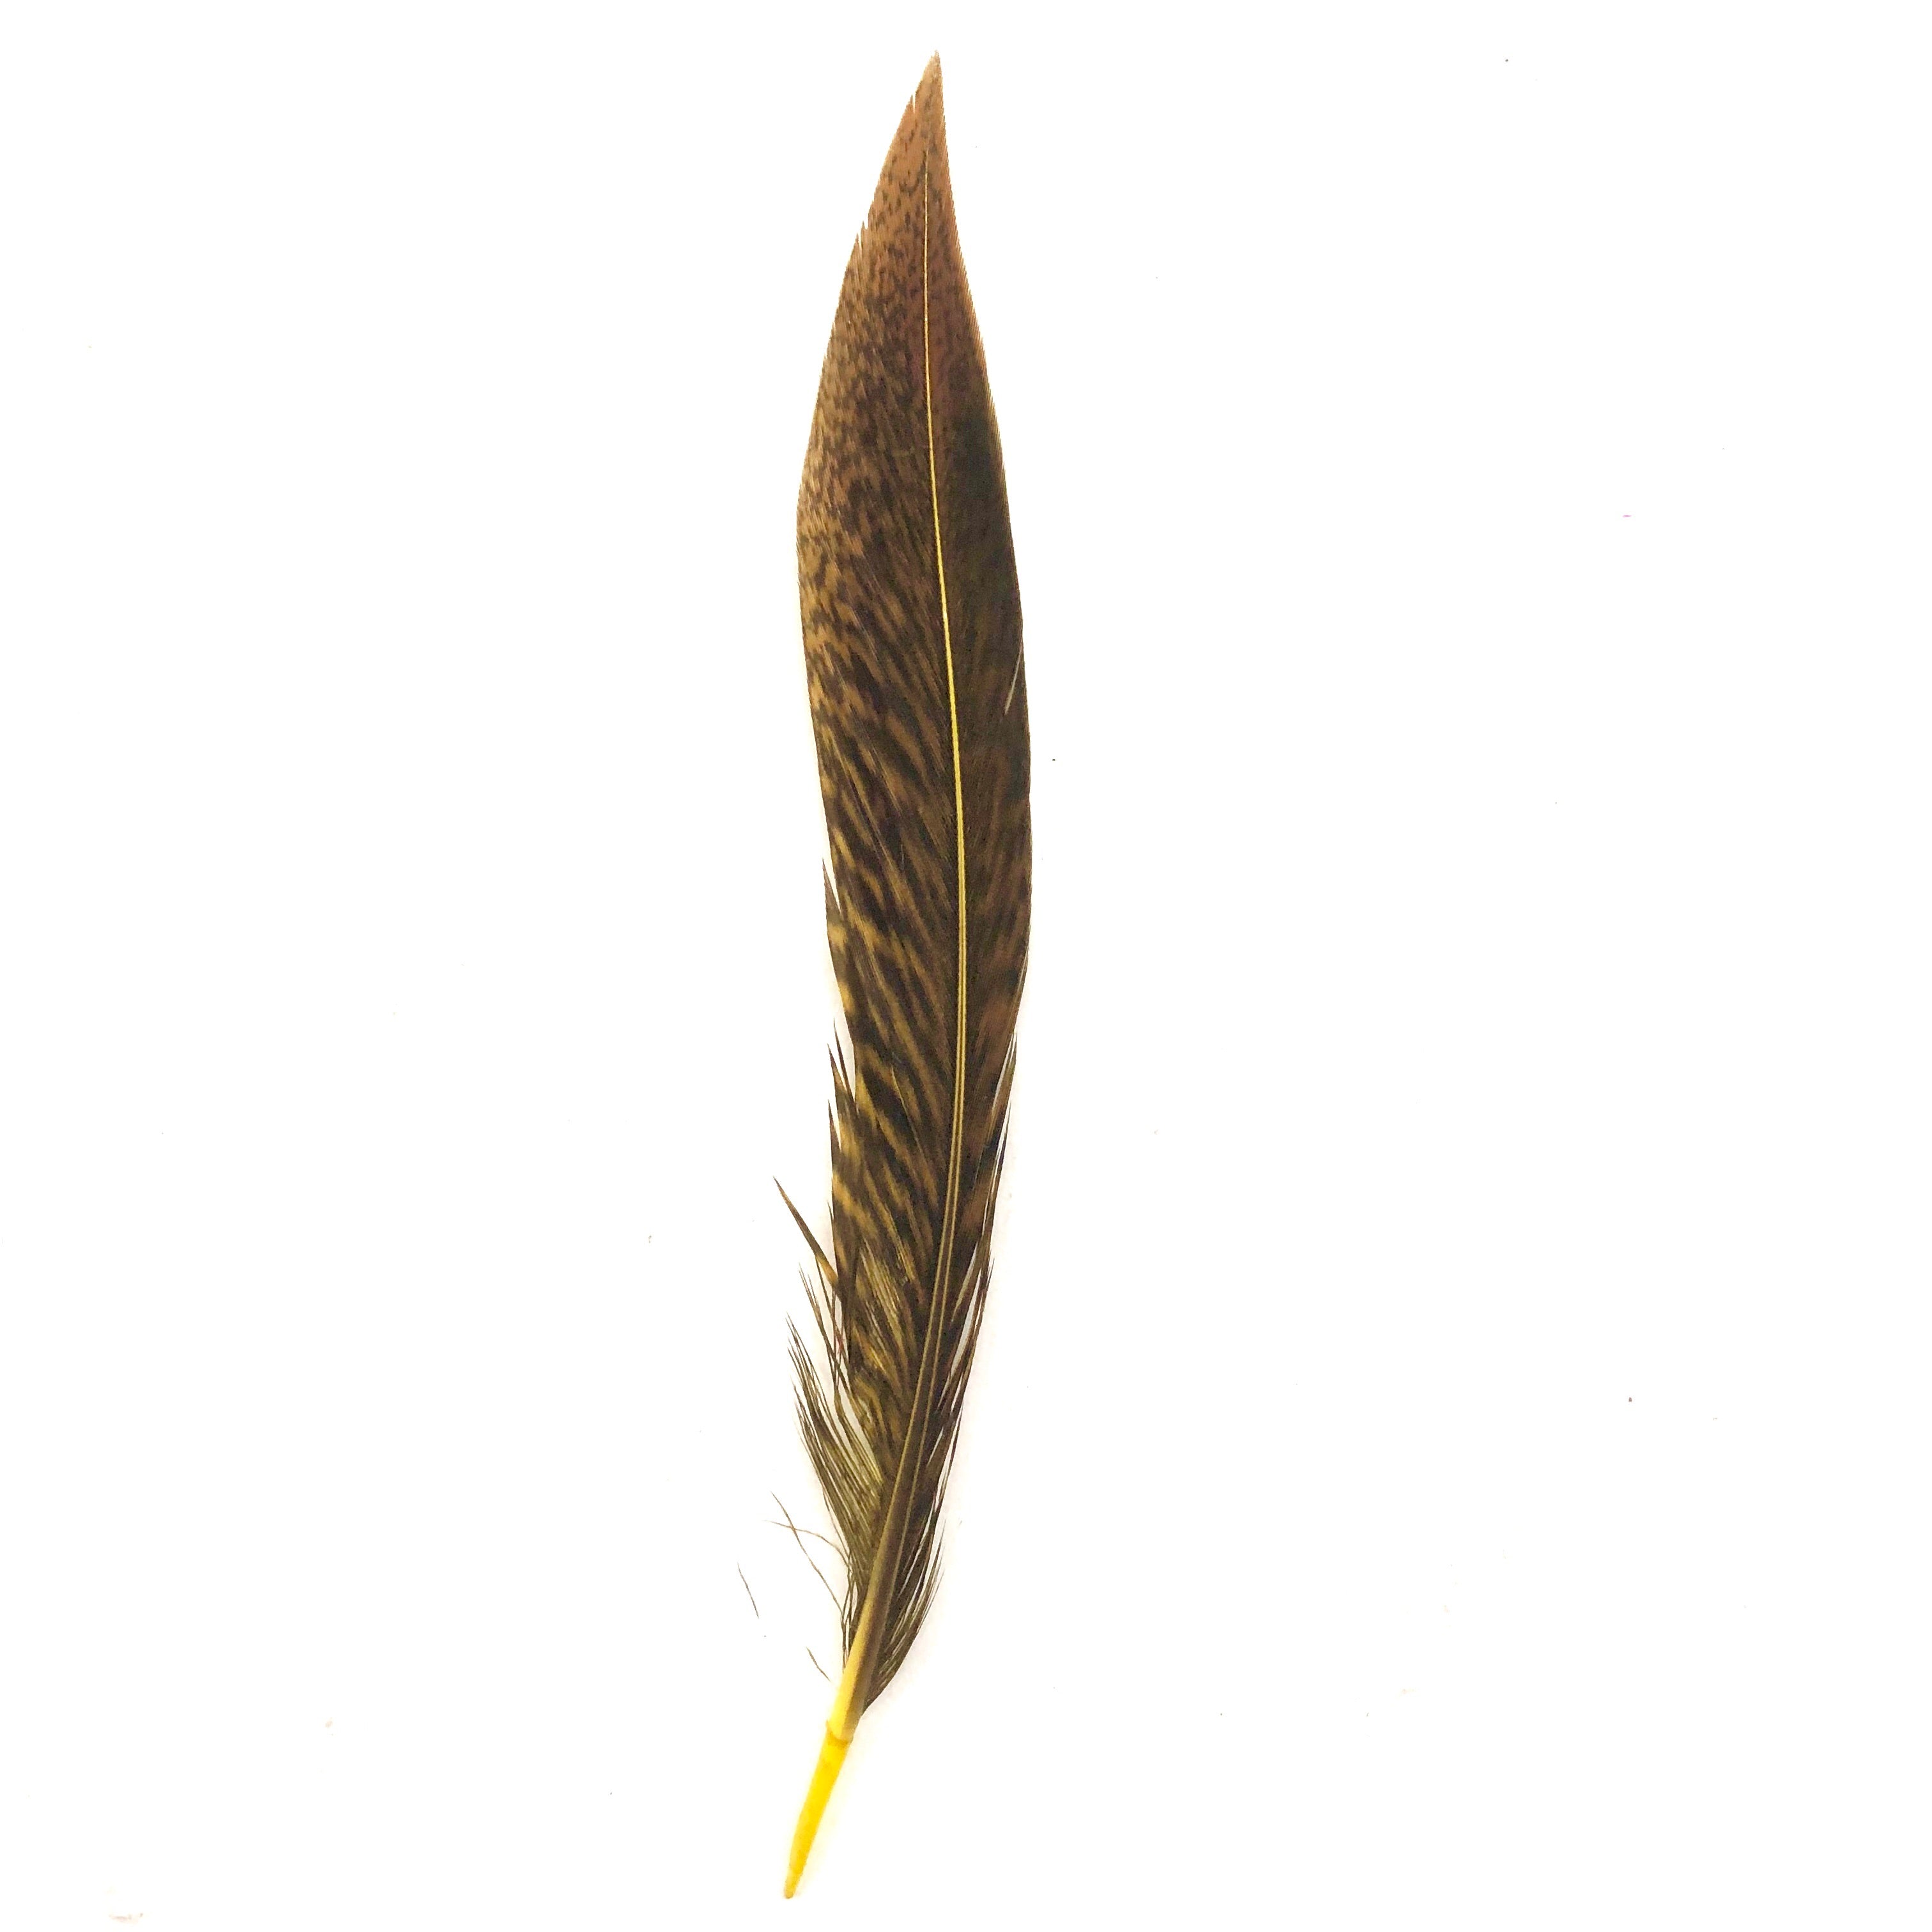 Under 6" Golden Pheasant Side Tail Feather x 10 pcs - Soft Yellow